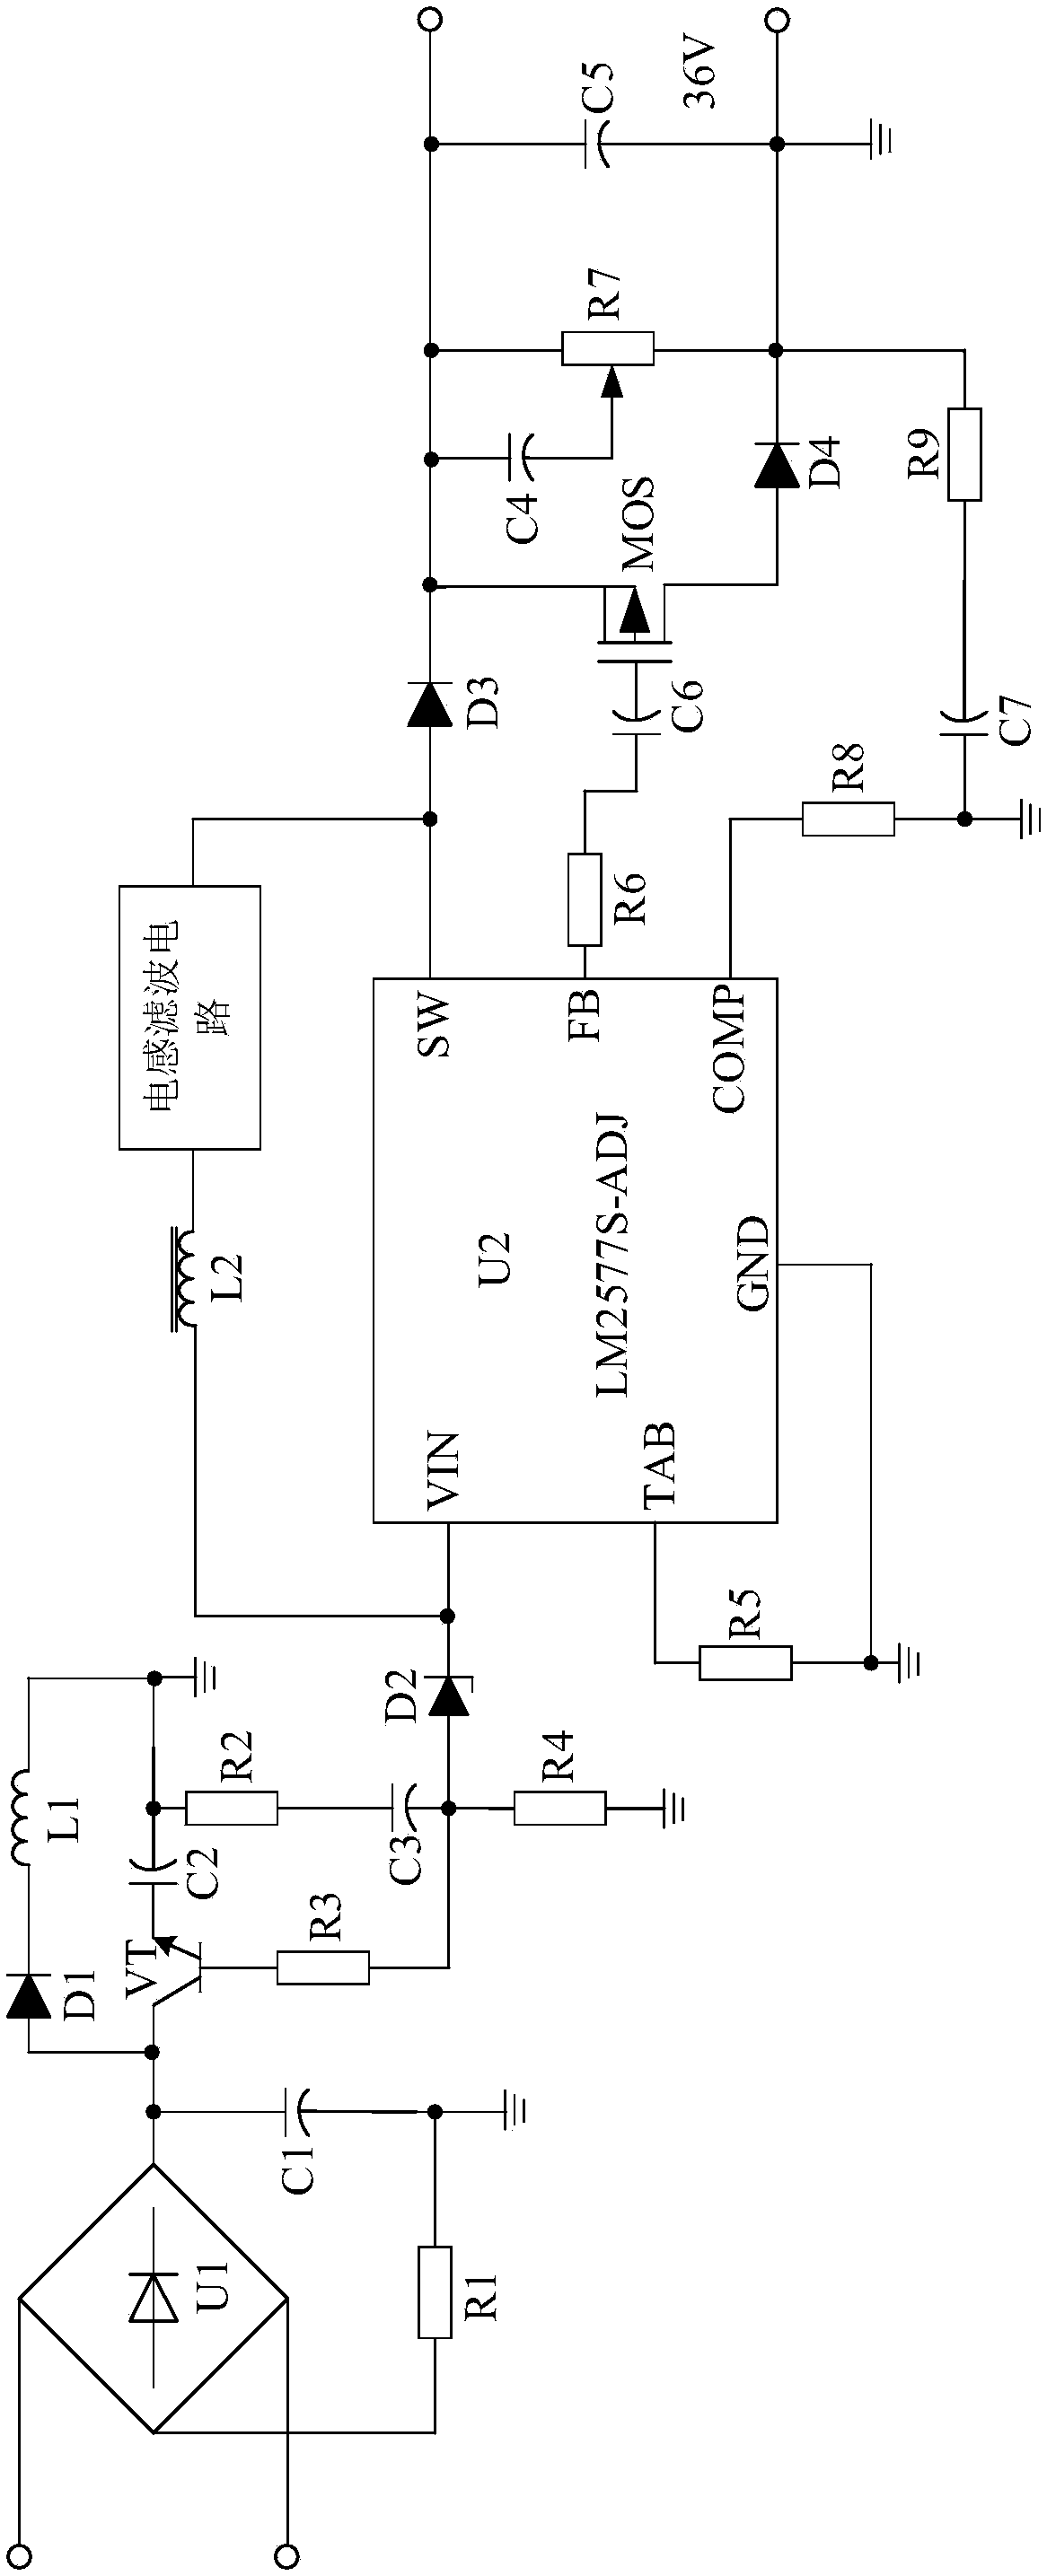 Partial voltage adjusting boost power supply system for high voltage electrostatic dust collectors